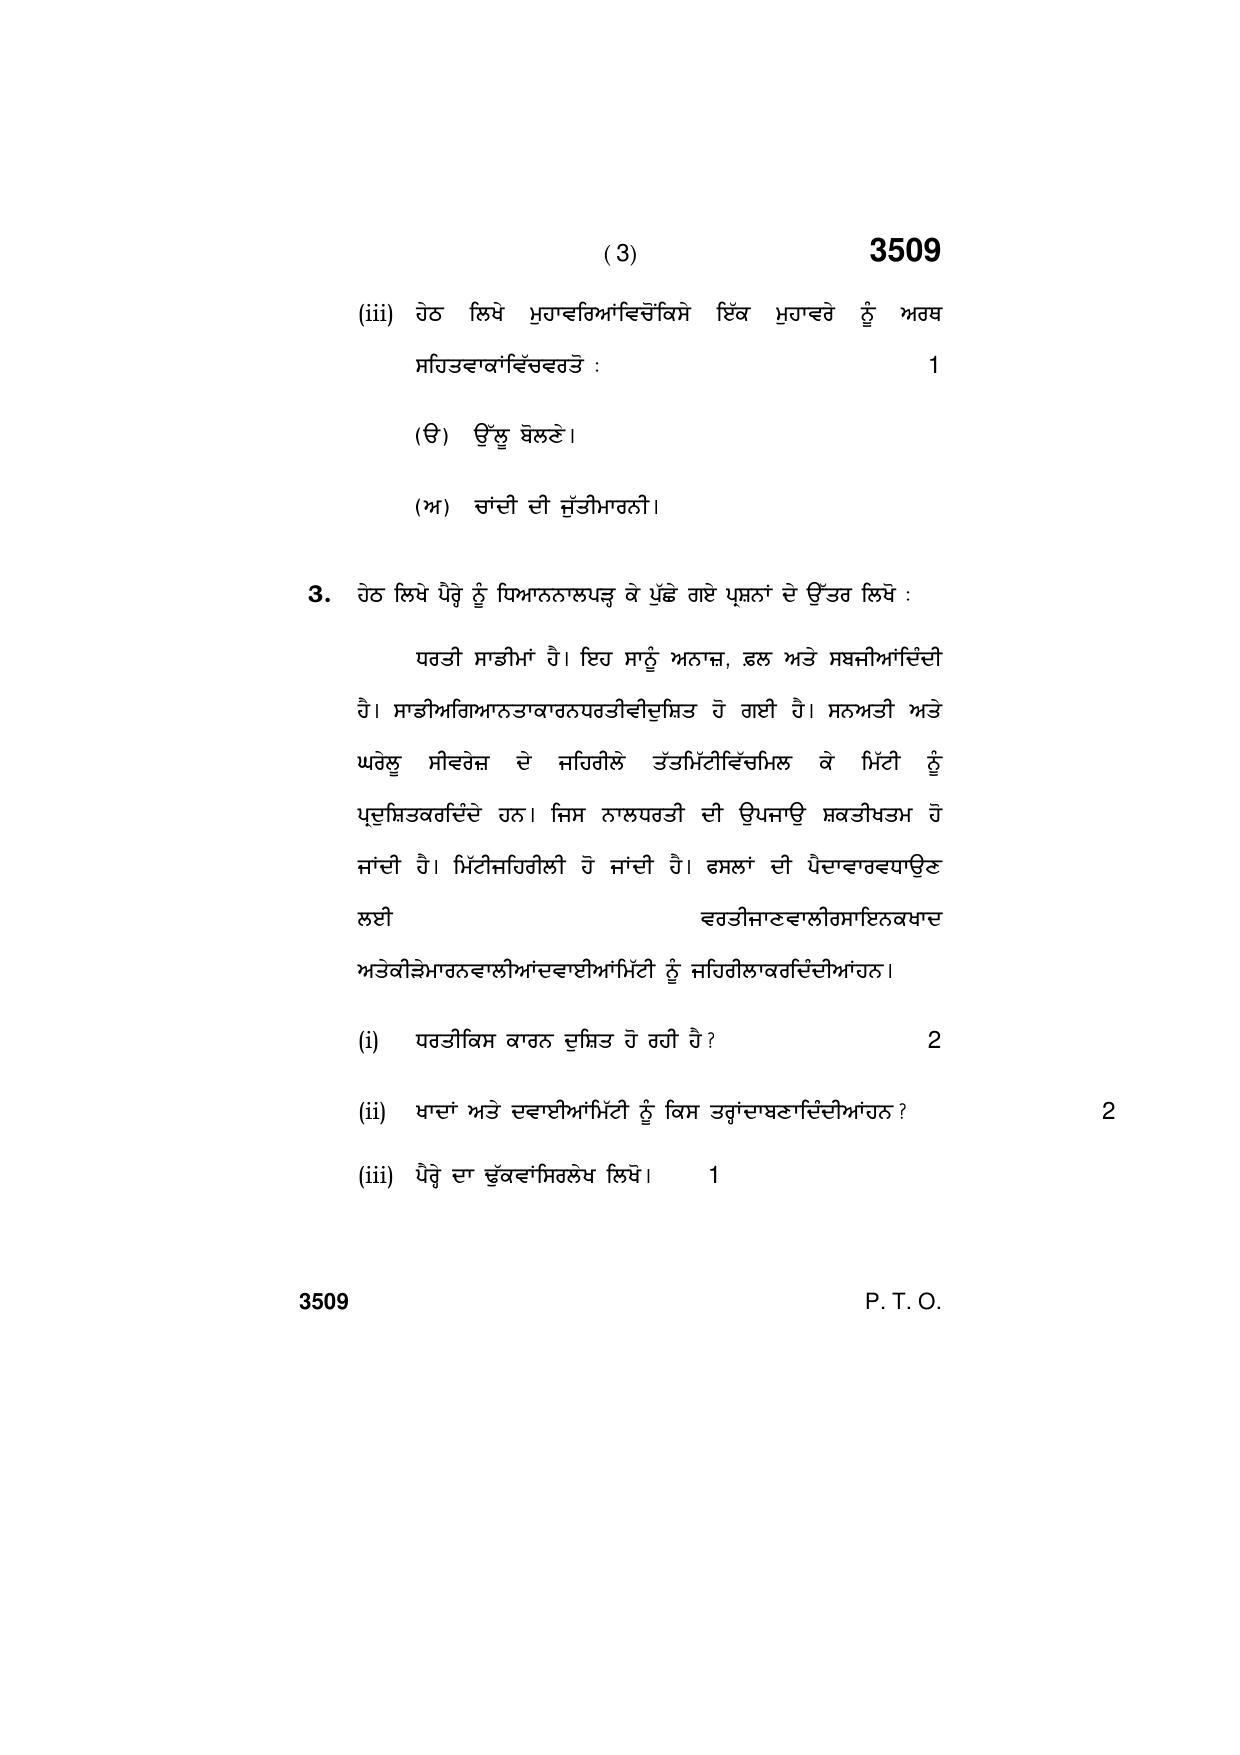 Haryana Board HBSE Class 10 Punjabi 2018 Question Paper - Page 3